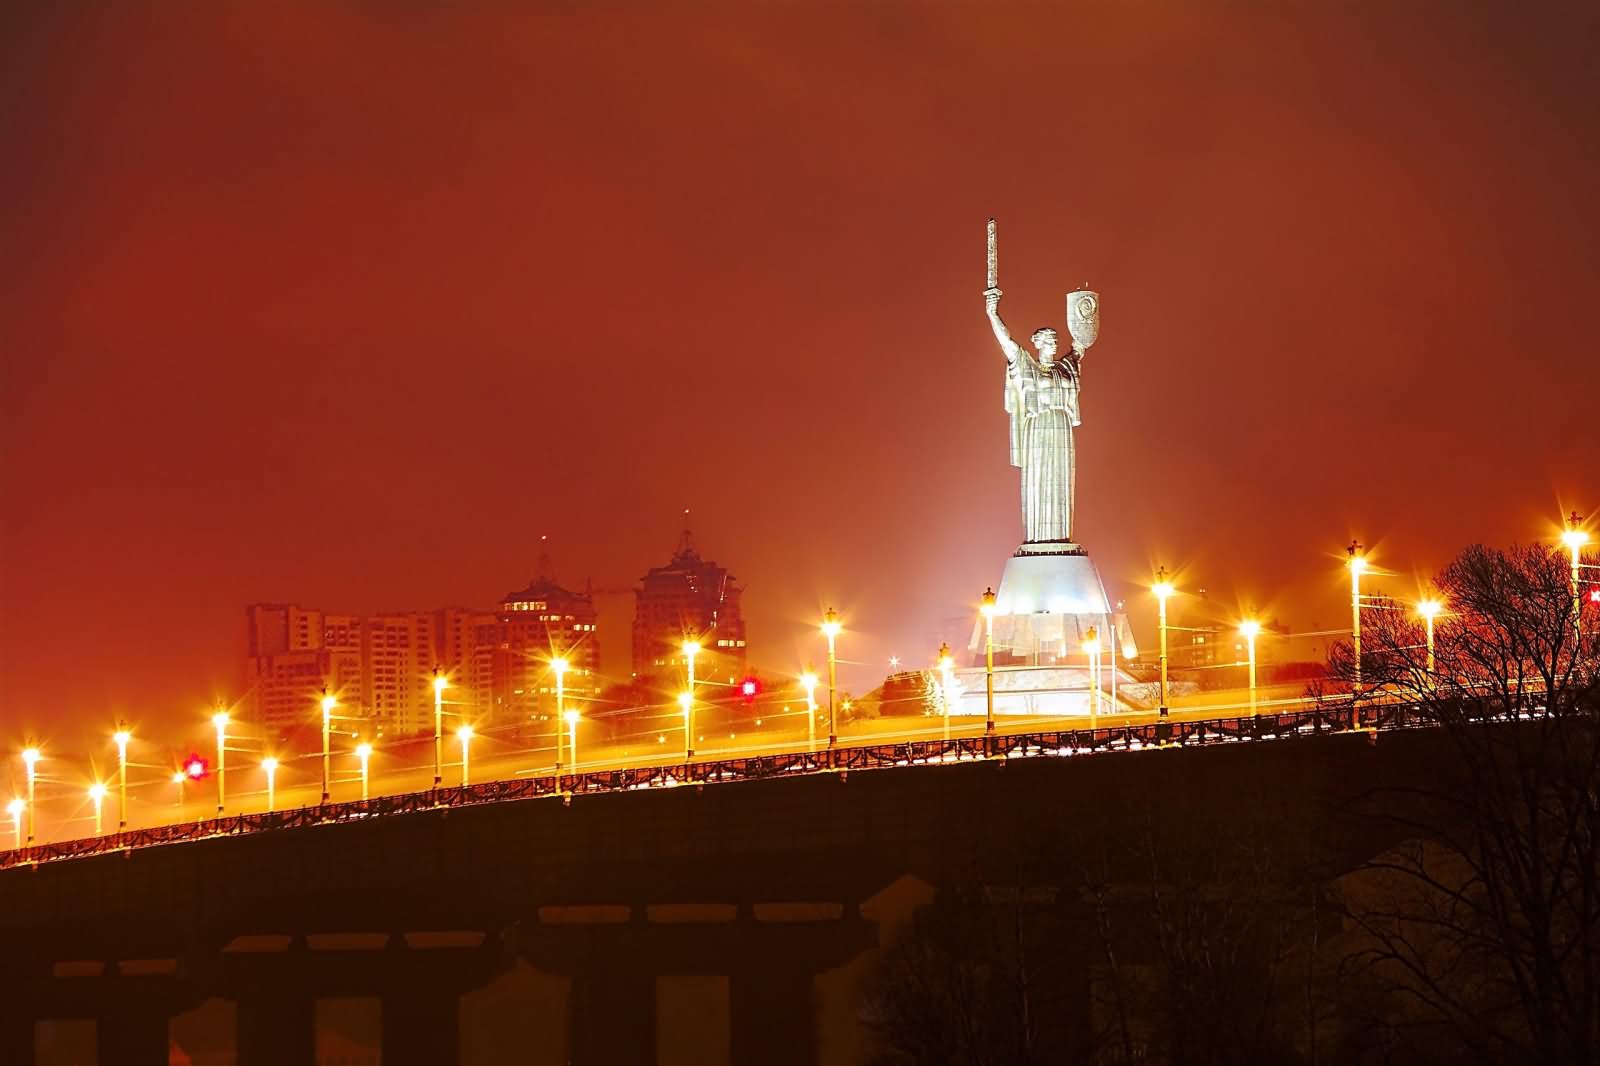 The Mother Motherland Statue Lit Up At Night